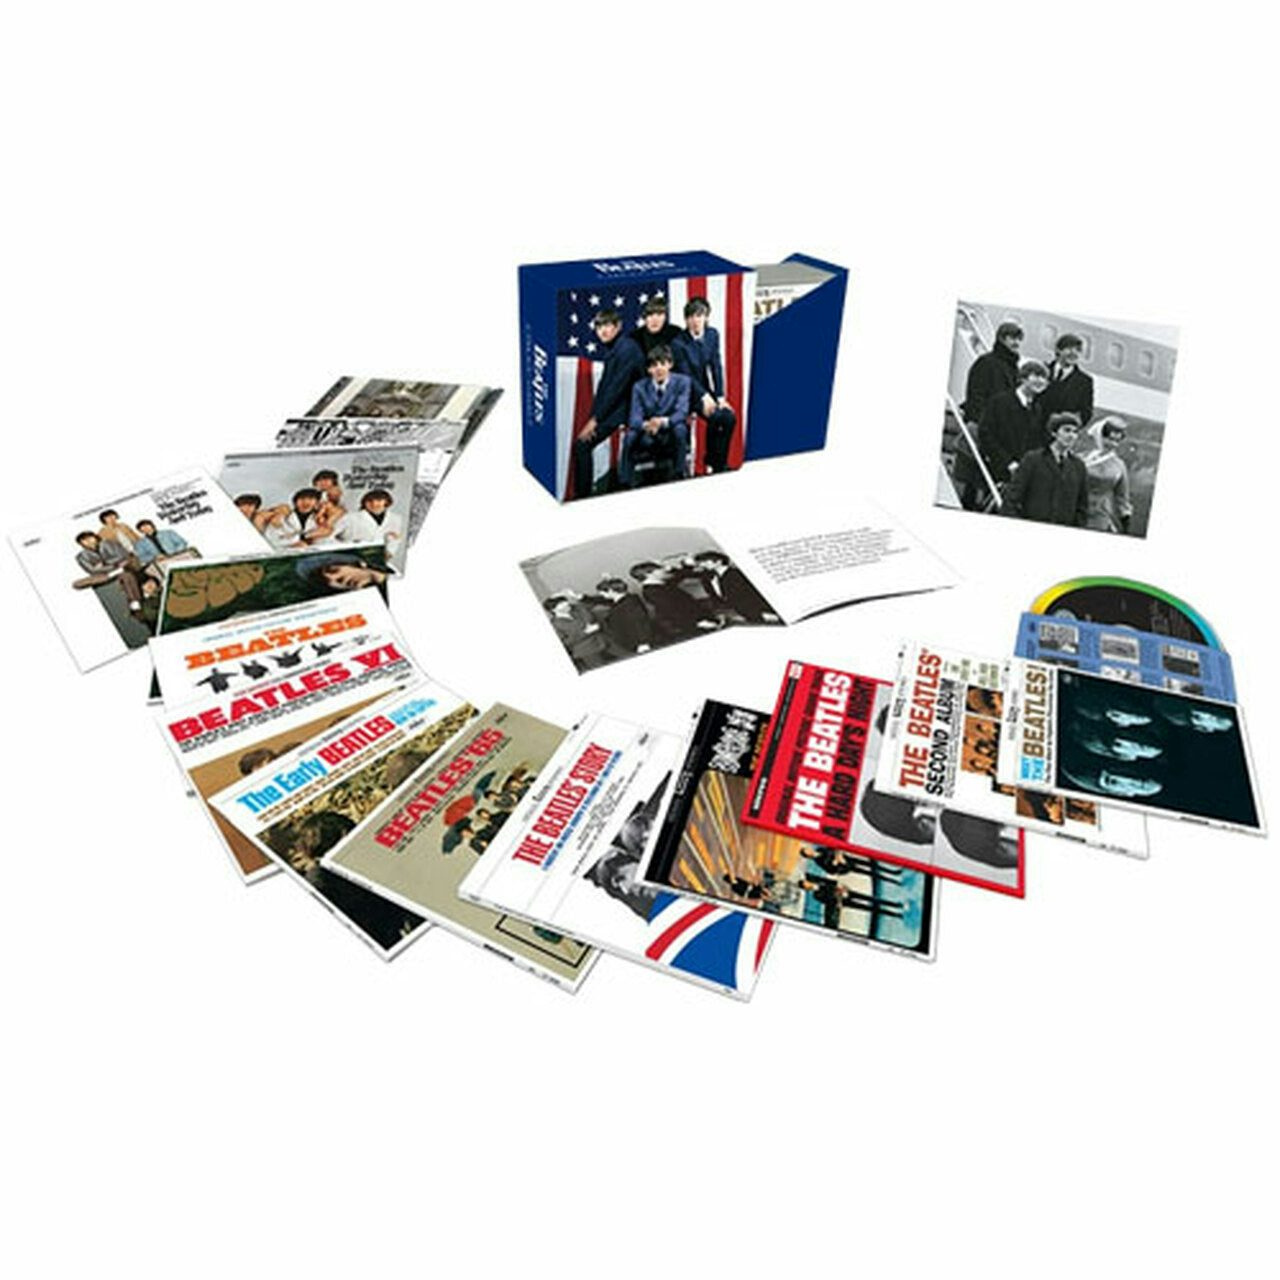 The Beatles The US Albums Box Set 13 CD $172.57